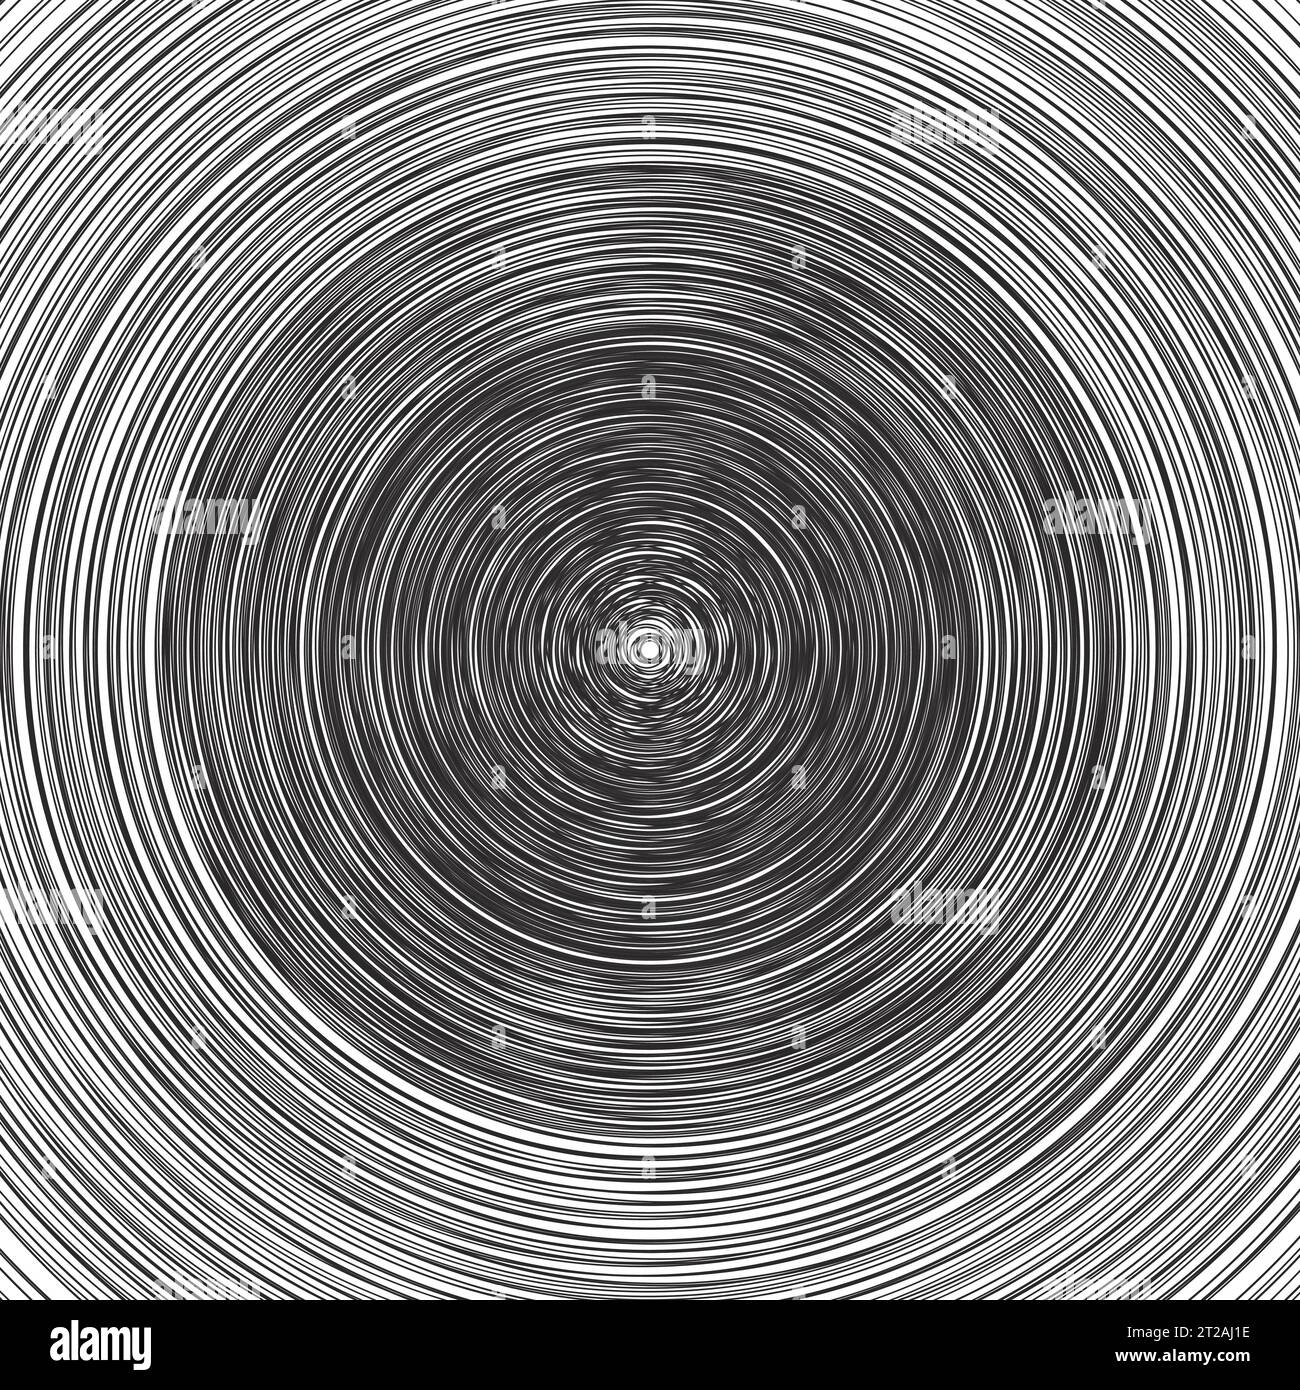 Abstract Black and White Concentric Circles Background Vector Stock Vector